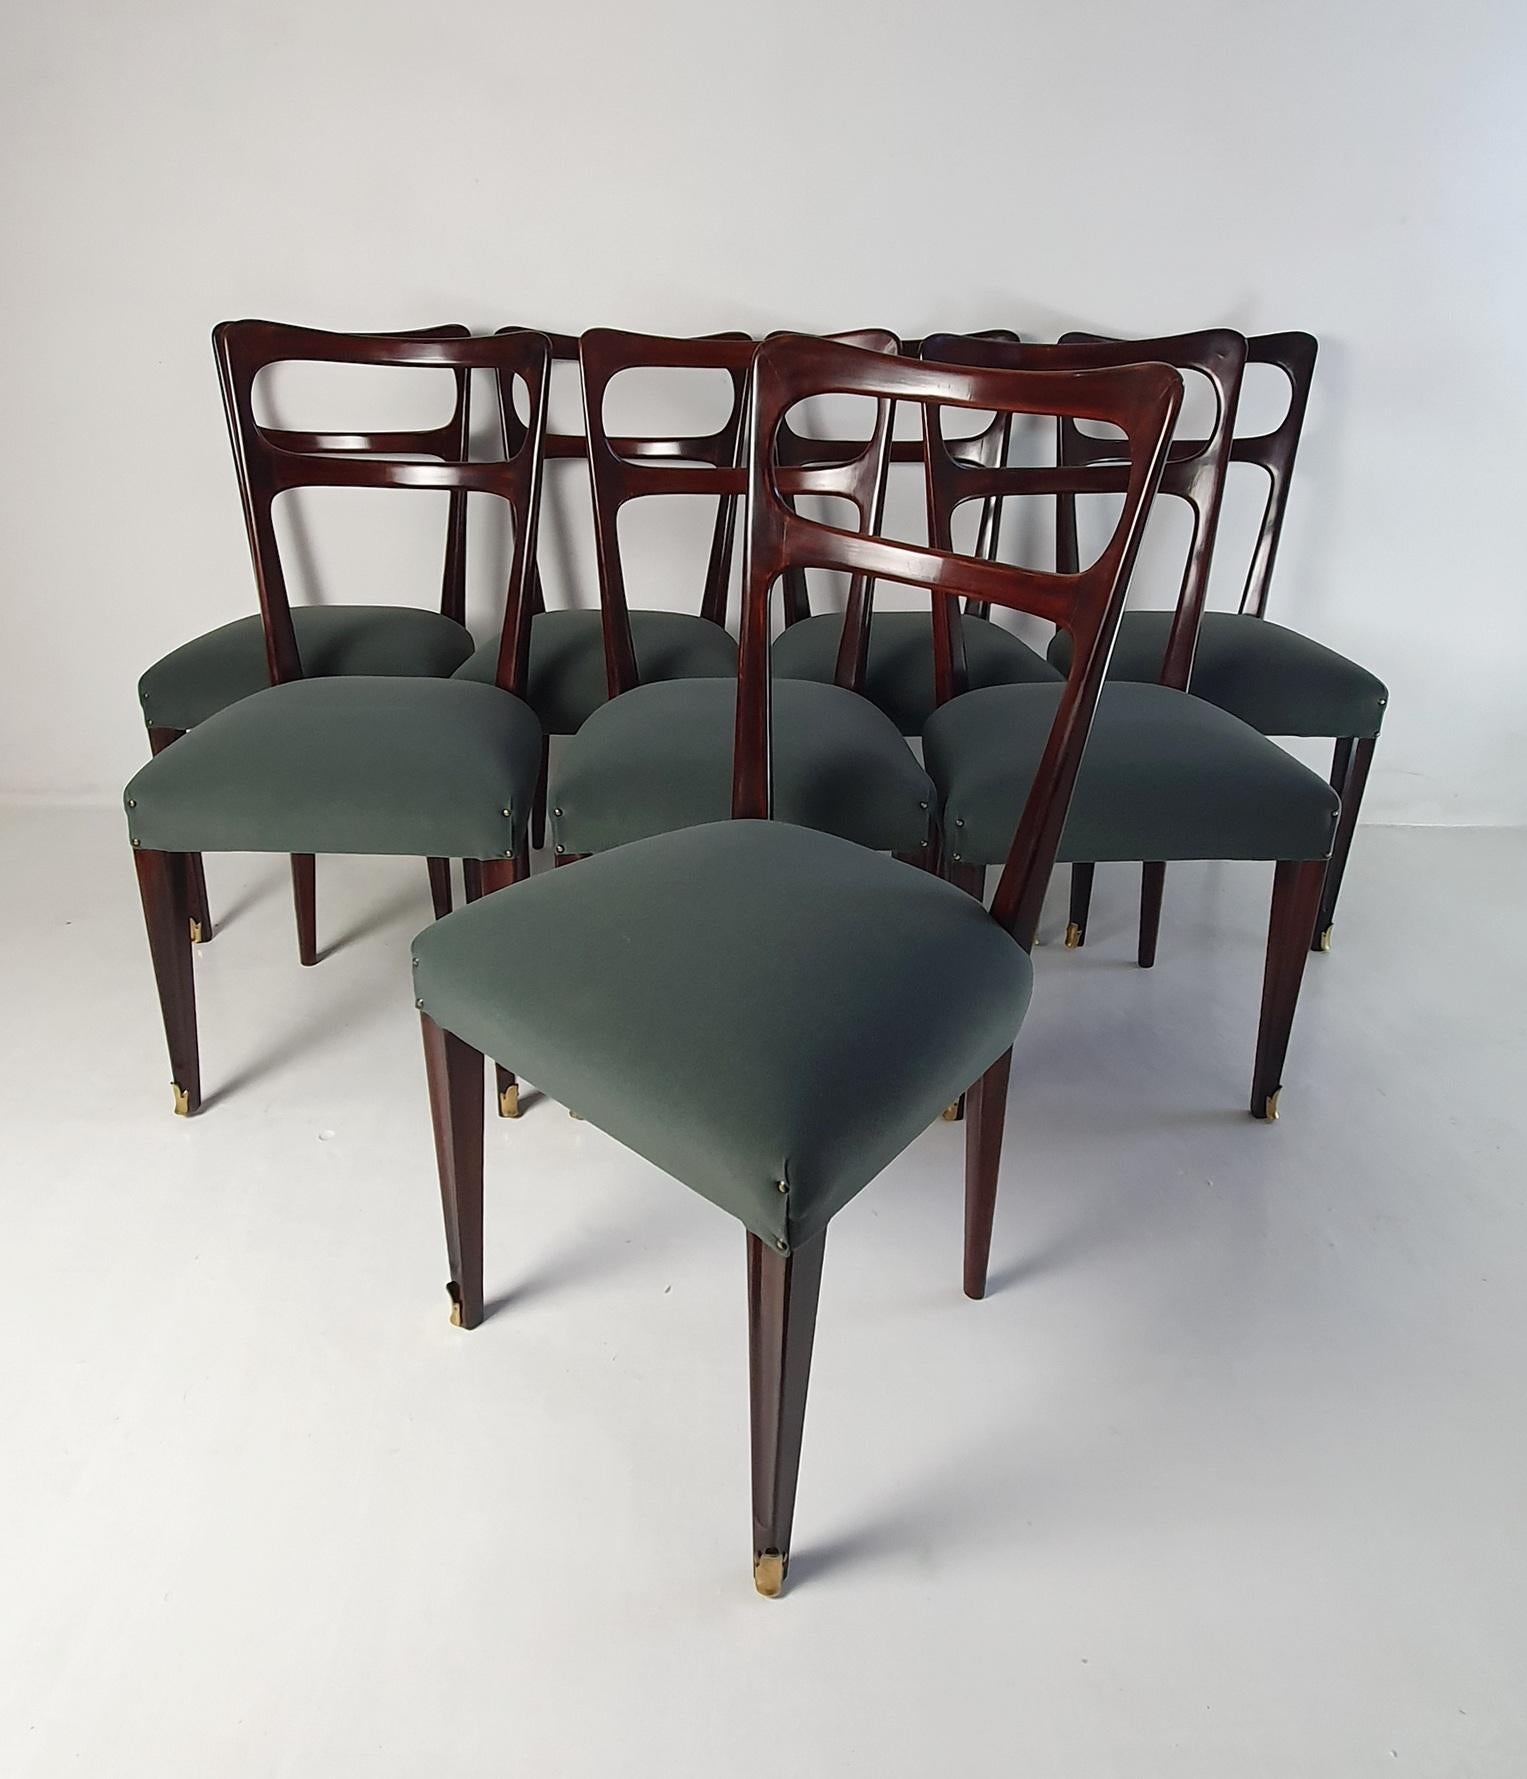 This set of eight mid-century Italian dining chairs is a stunning example of elegant design and supreme craftsmanship. The chairs have recently undergone a professional restoration and reupholstery, ensuring that they are in excellent condition and